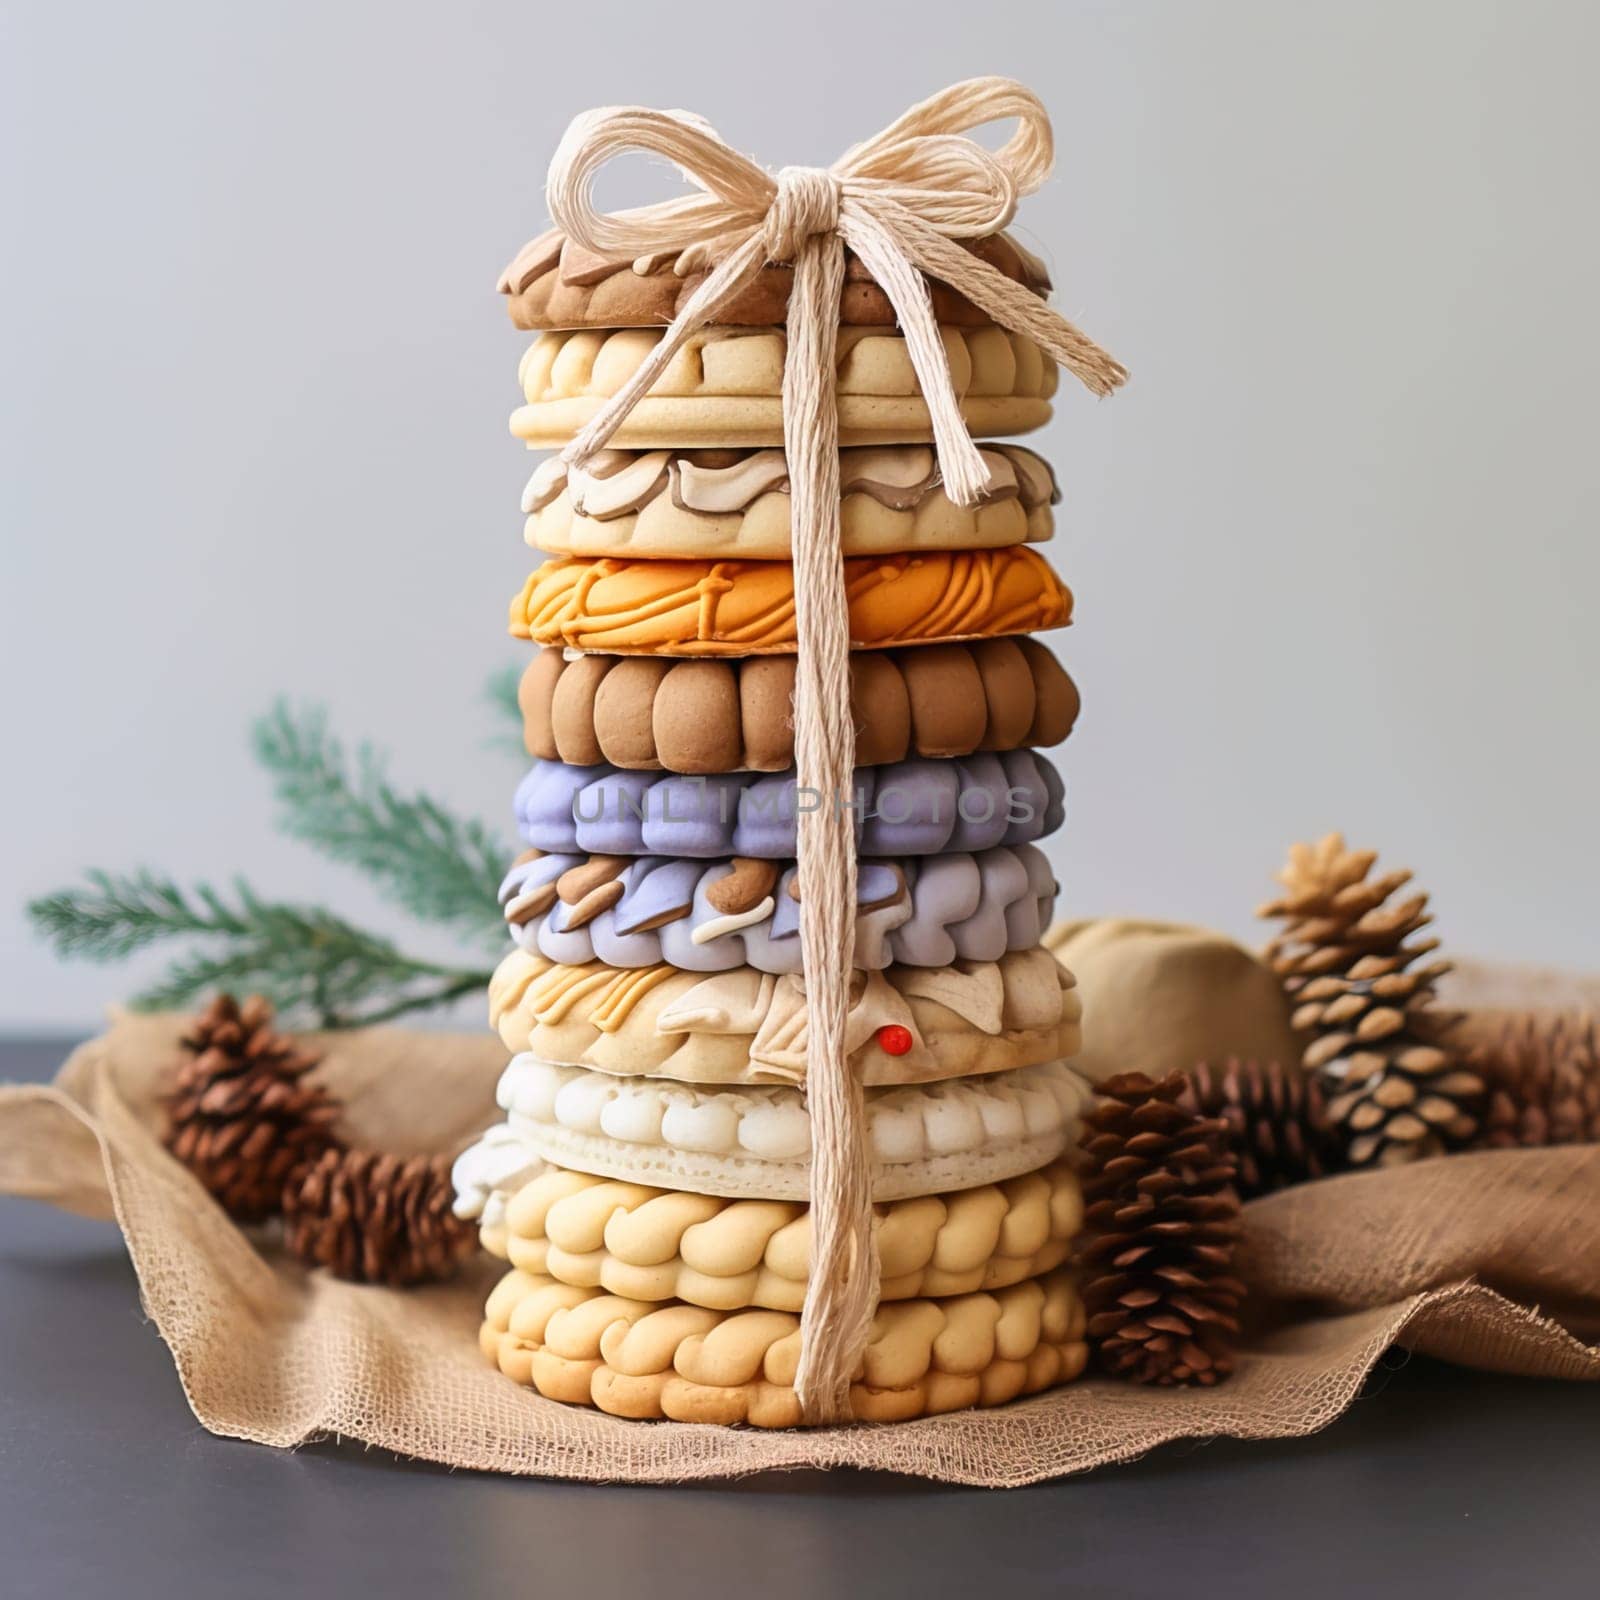 New Year's cookies in a stack tied with braid. High quality photo